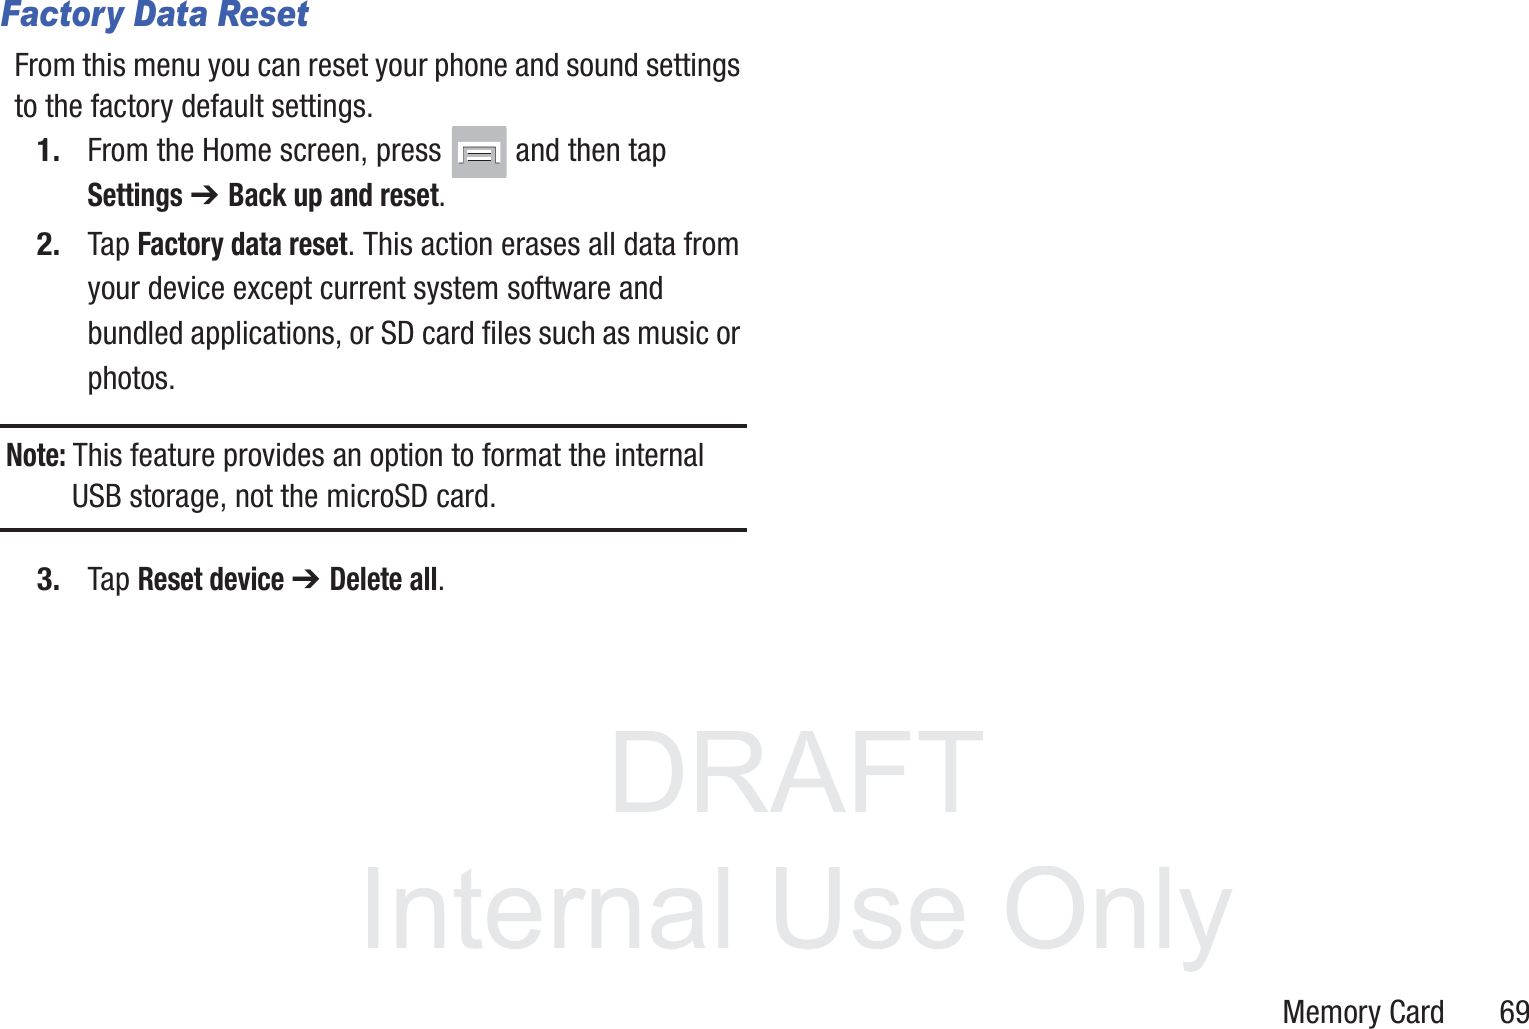 DRAFT InternalUse OnlyMemory Card       69Factory Data ResetFrom this menu you can reset your phone and sound settings to the factory default settings.1. From the Home screen, press   and then tap Settings ➔ Back up and reset.2. Tap Factory data reset. This action erases all data from your device except current system software and bundled applications, or SD card files such as music or photos.Note: This feature provides an option to format the internal USB storage, not the microSD card.3. Tap Reset device ➔ Delete all.